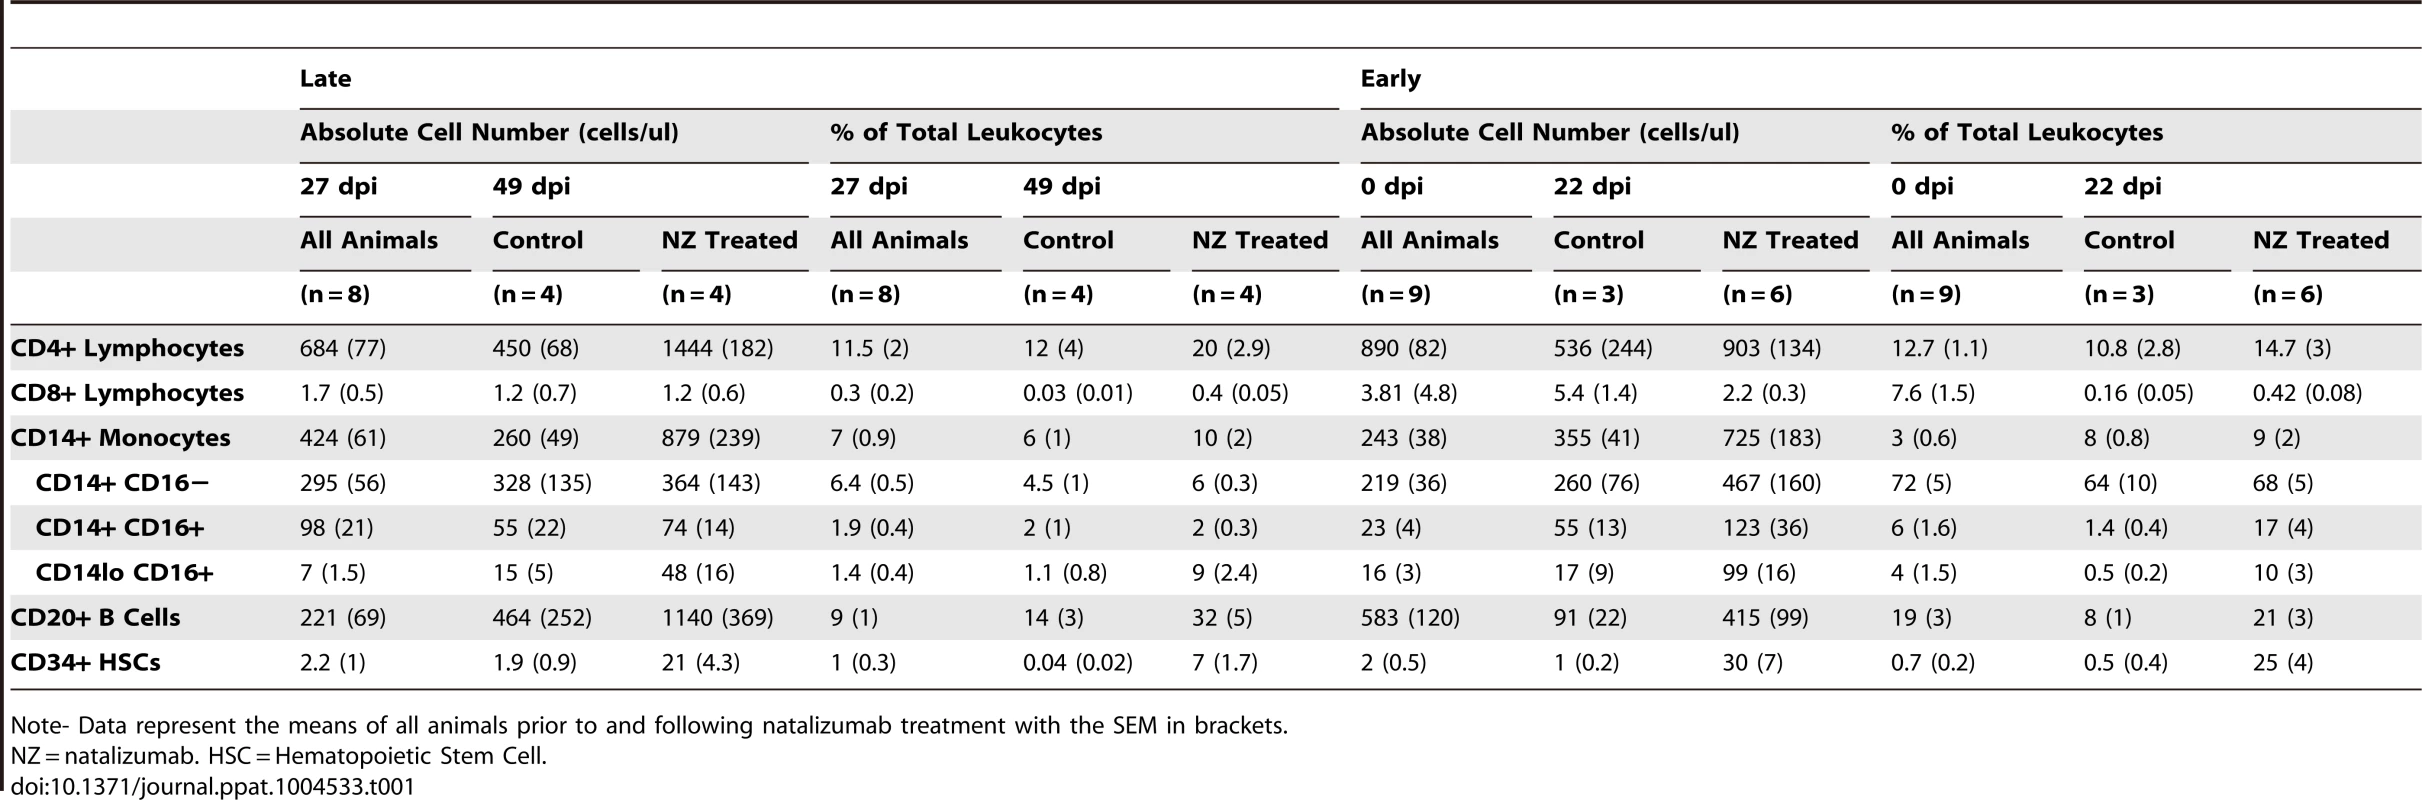 The percentages and absolute cell numbers of lymphocytes, monocytes, B cells, and hematopoietic stem cells in late and early SIV-infected animals.